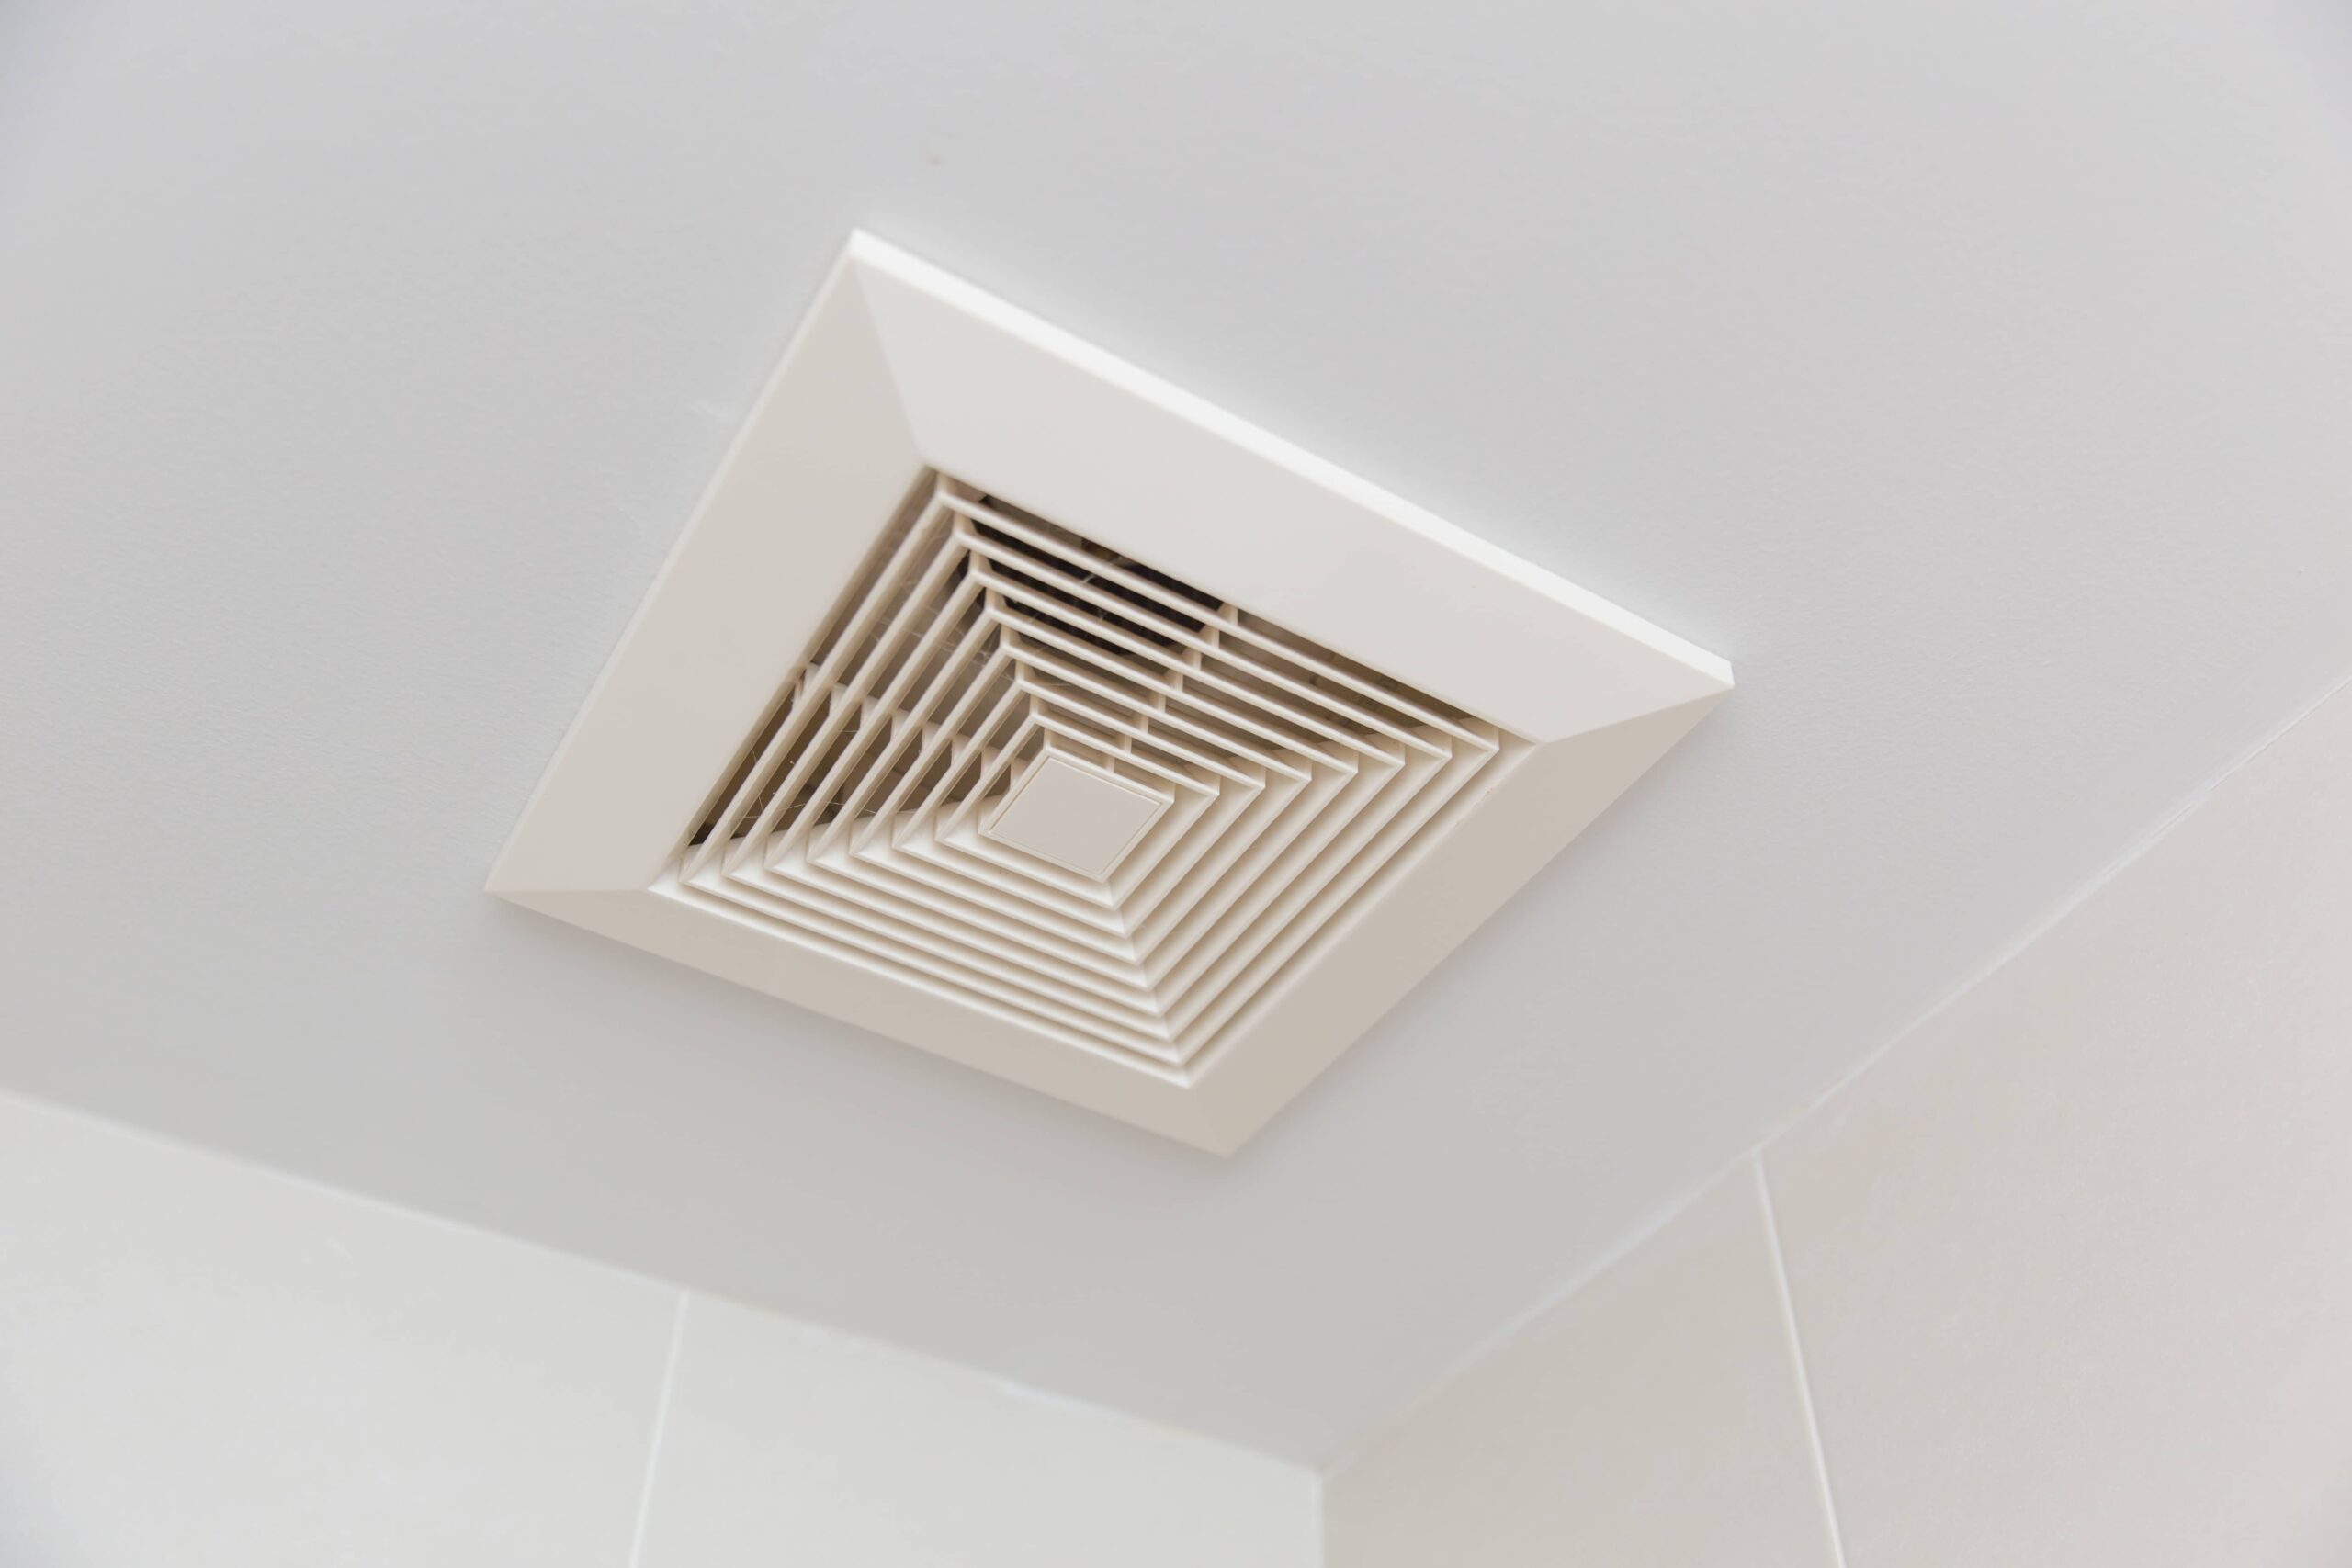 How To Install A Bathroom Fan In The Attic